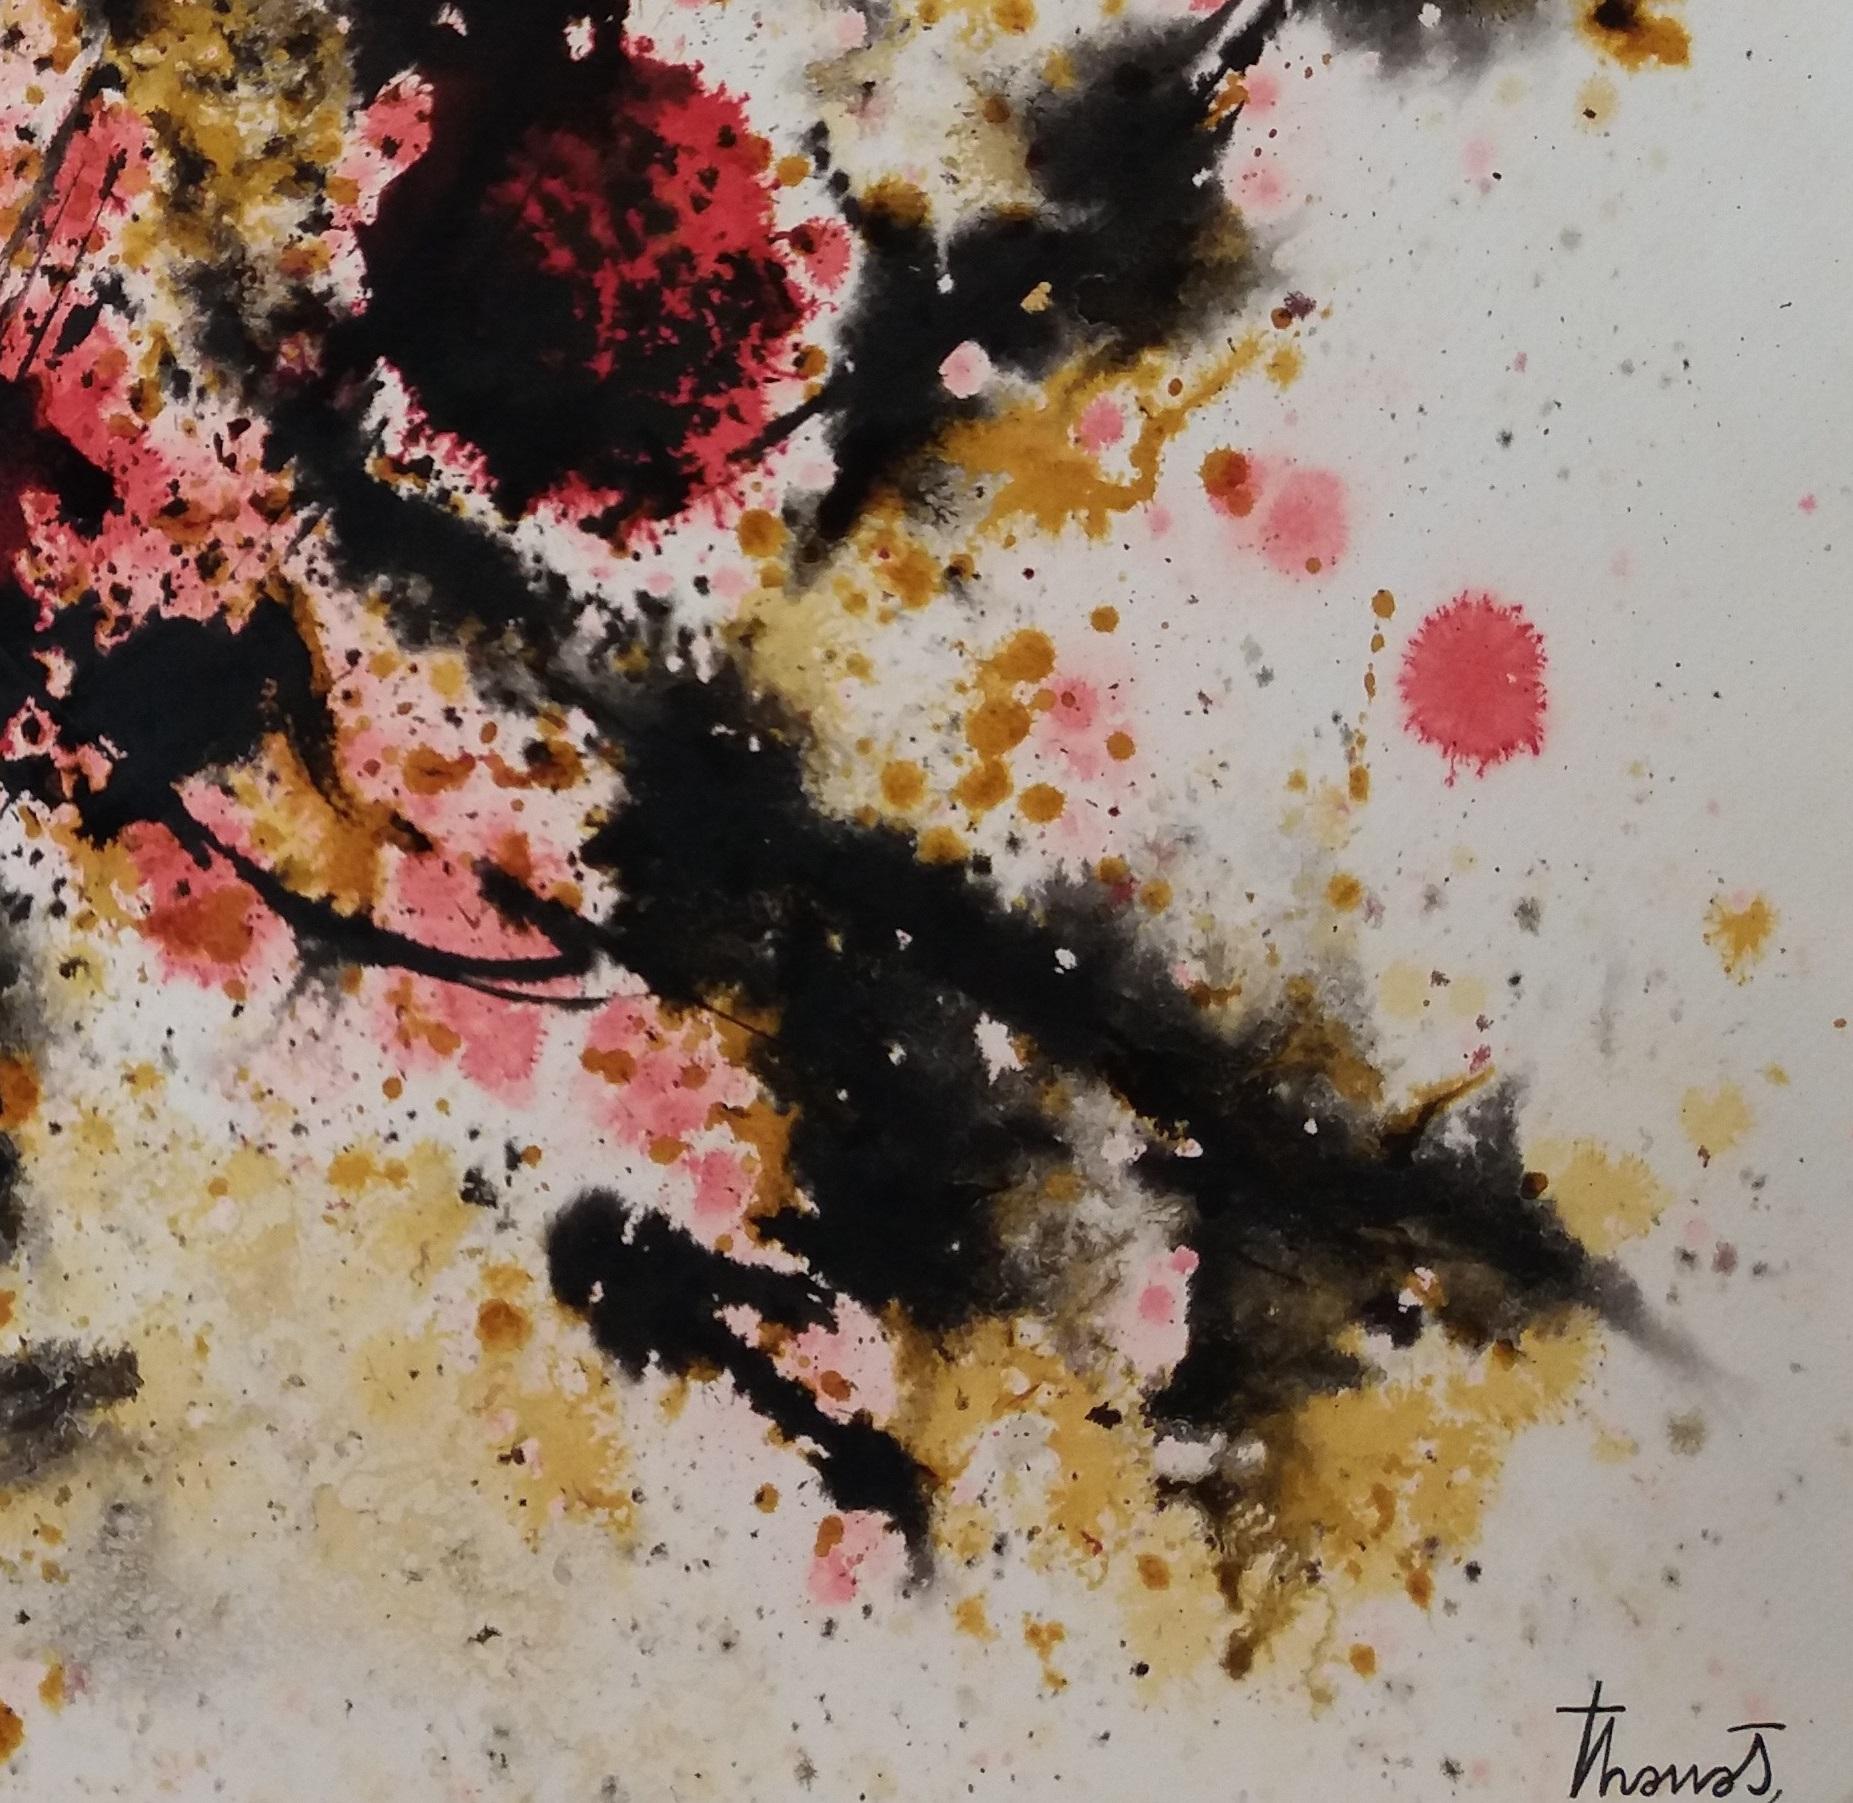 Tharrats  7 Red  Black  Constellation 7 original acrylic paper painting - Abstract Painting by Josep THARRATS